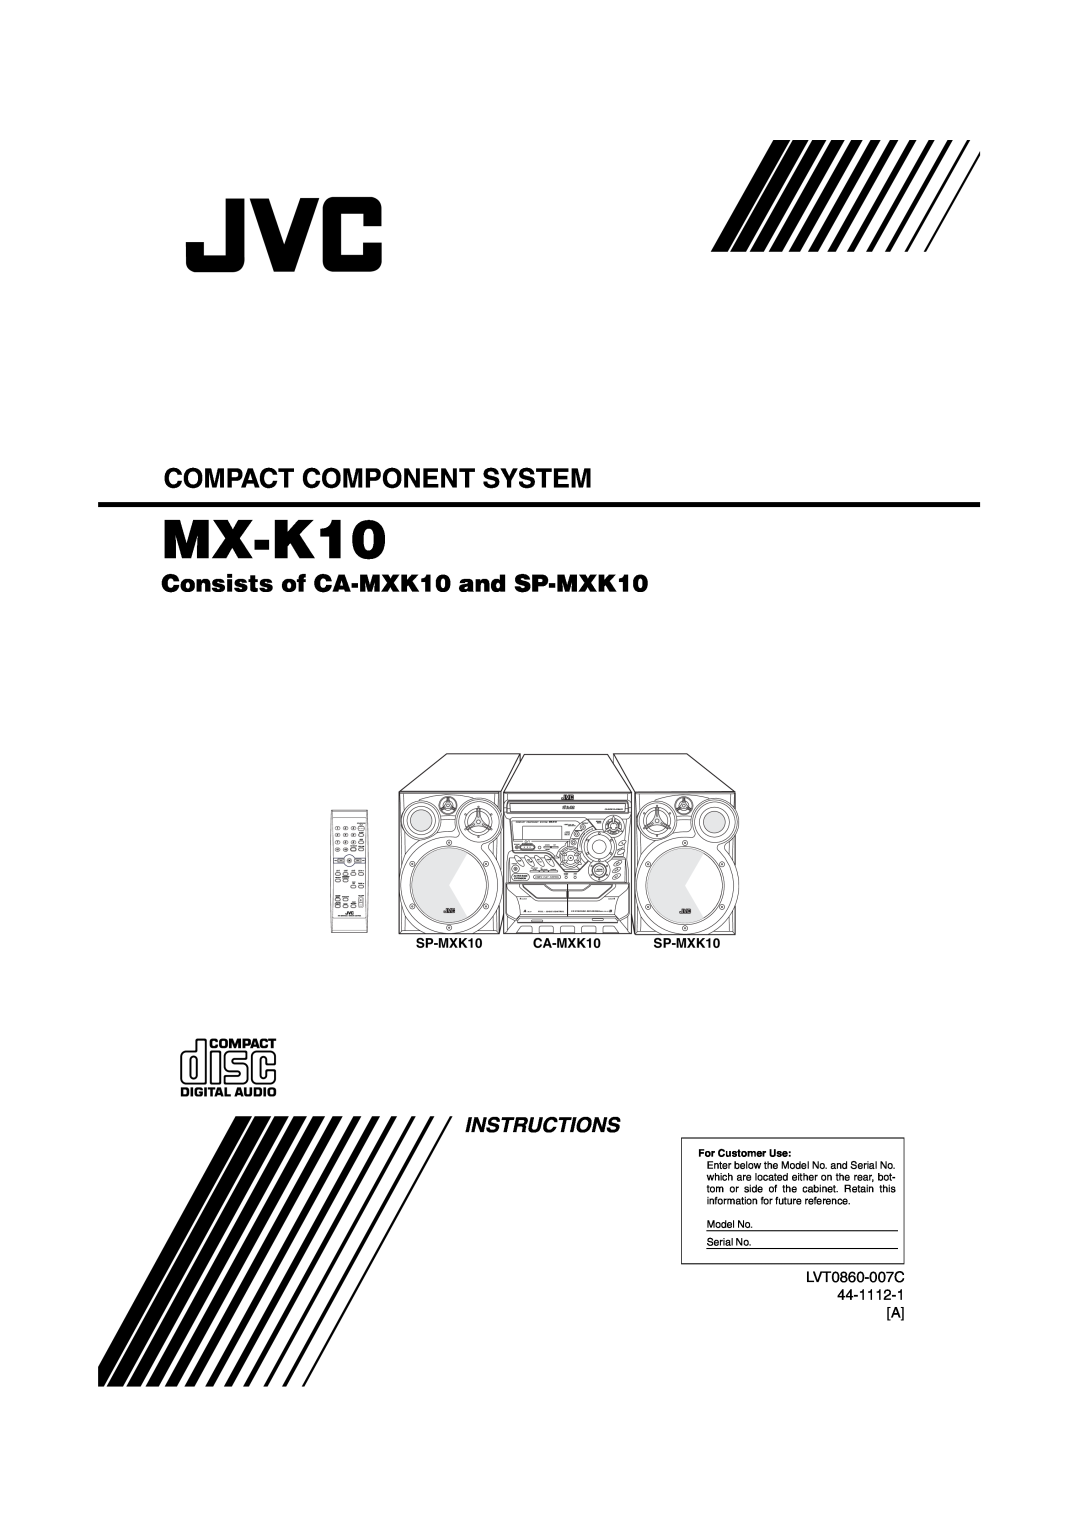 JVC MX-K10 manual Consists of CA-MXK10and SP-MXK10, Instructions, Standby/On Fmmodefmsleepaux/Am, Compact Component System 